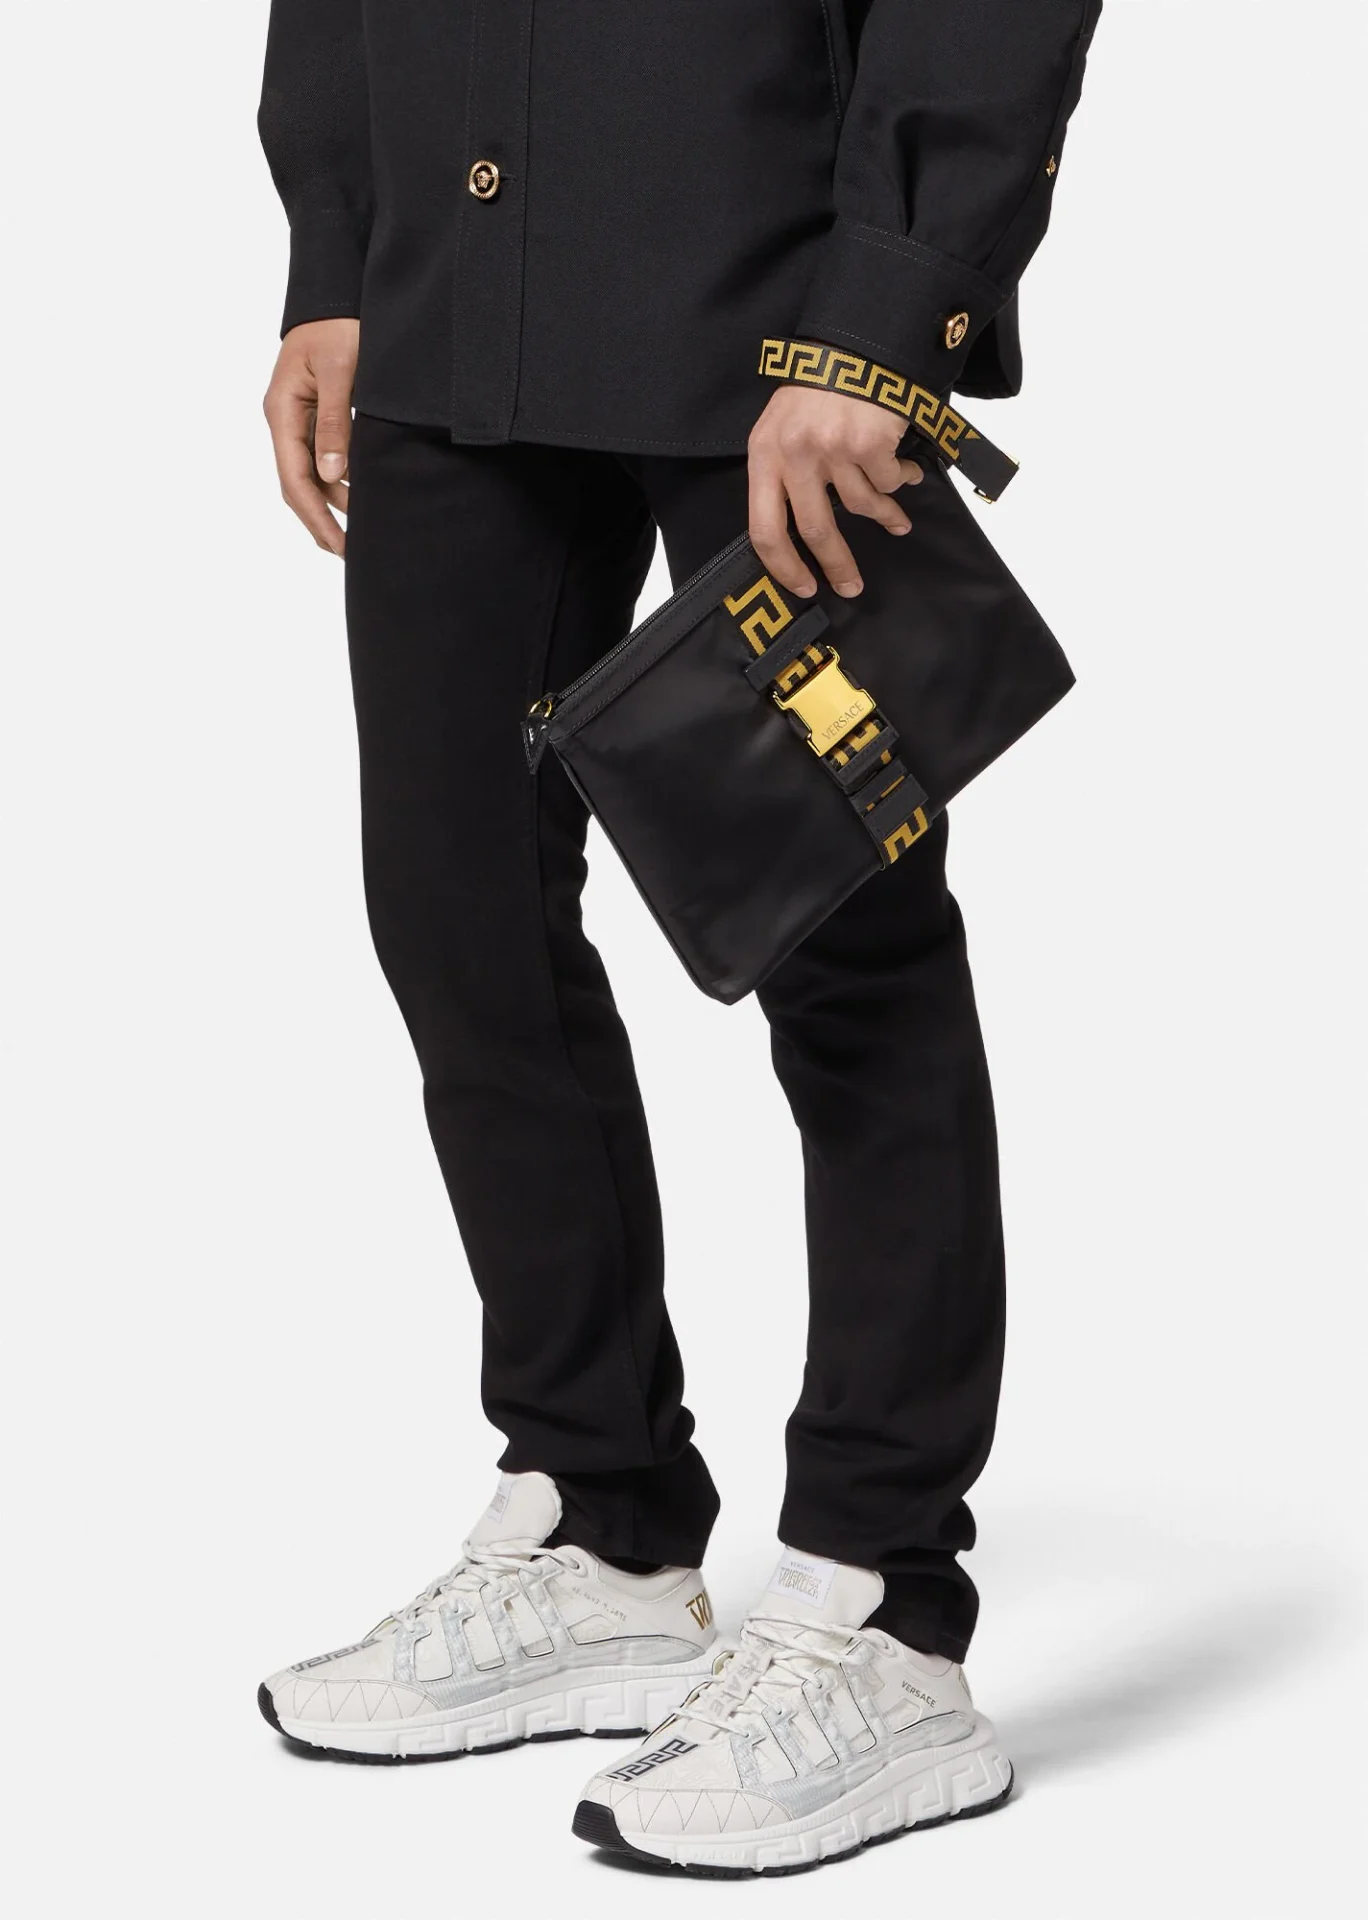 A person holding versace greca pouch bag